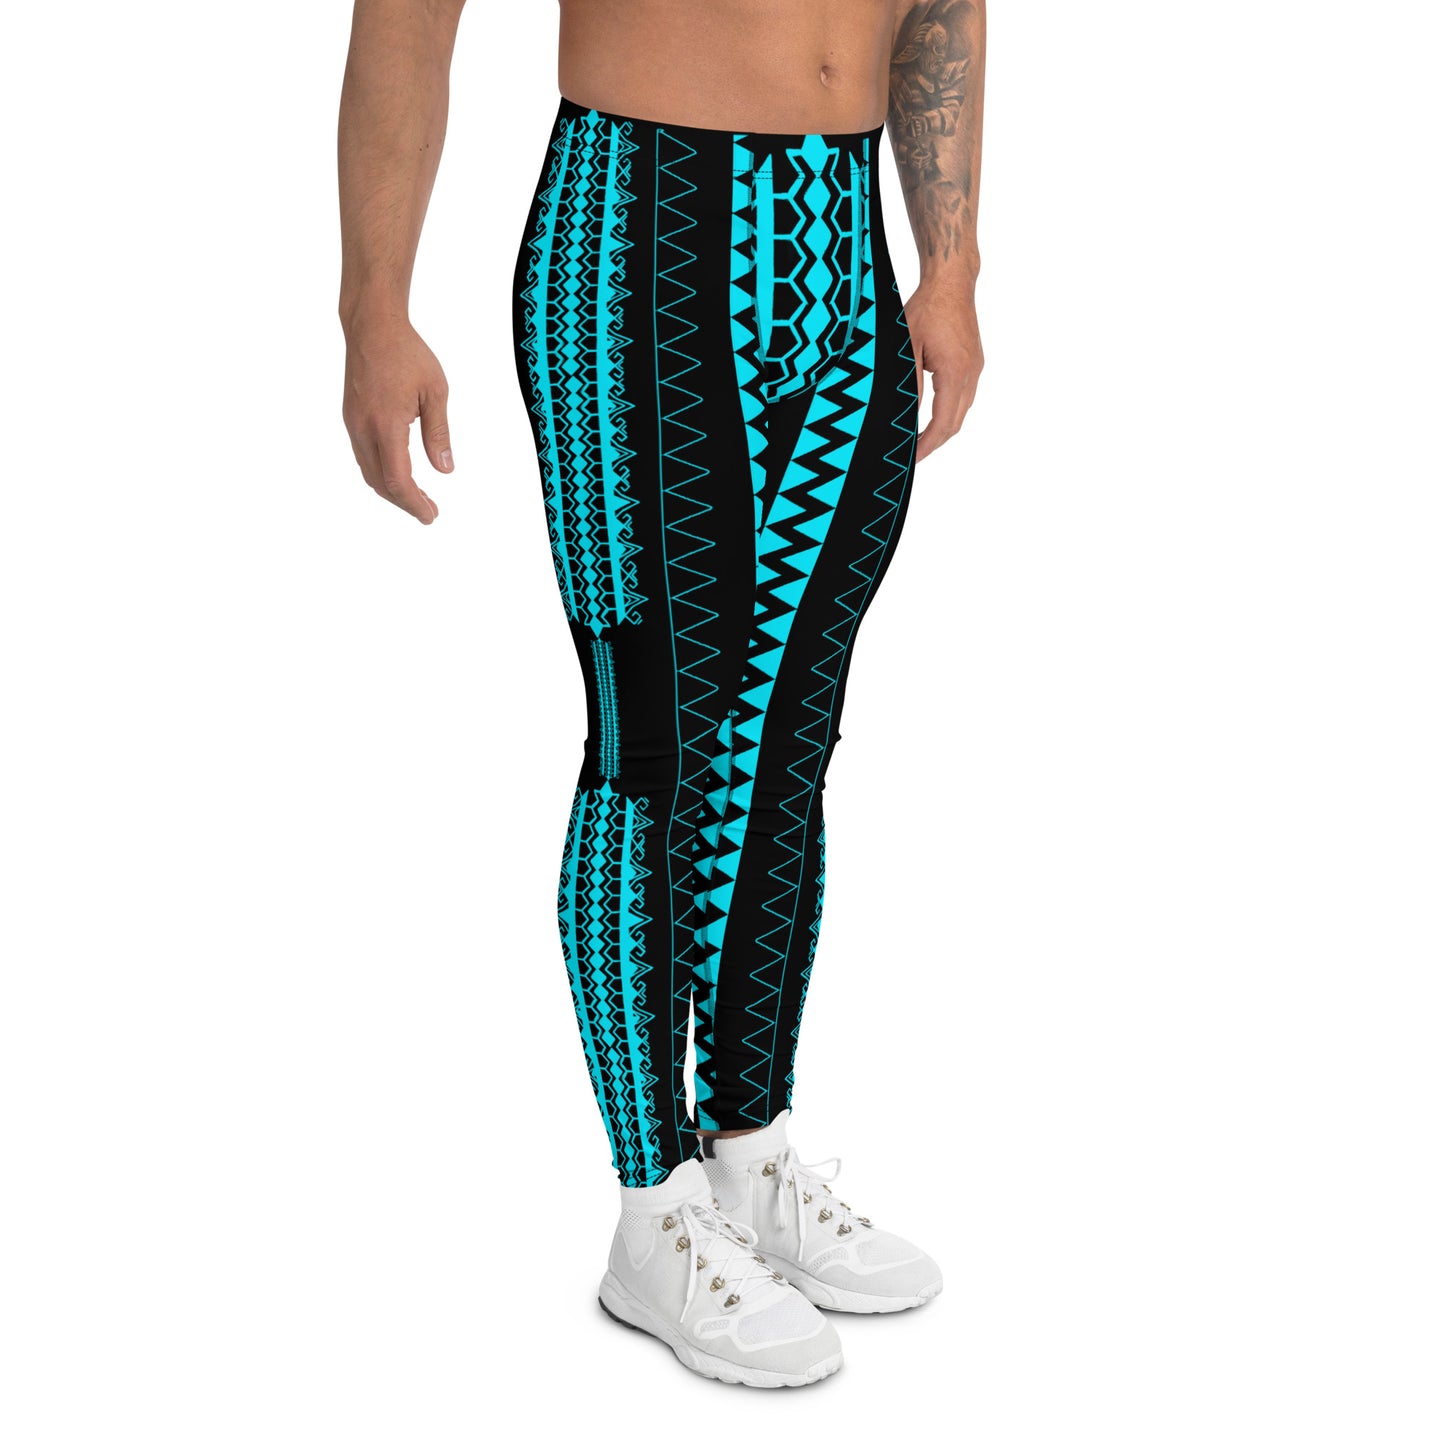 Pintados Leggings Black and Teal "Masculine Size"